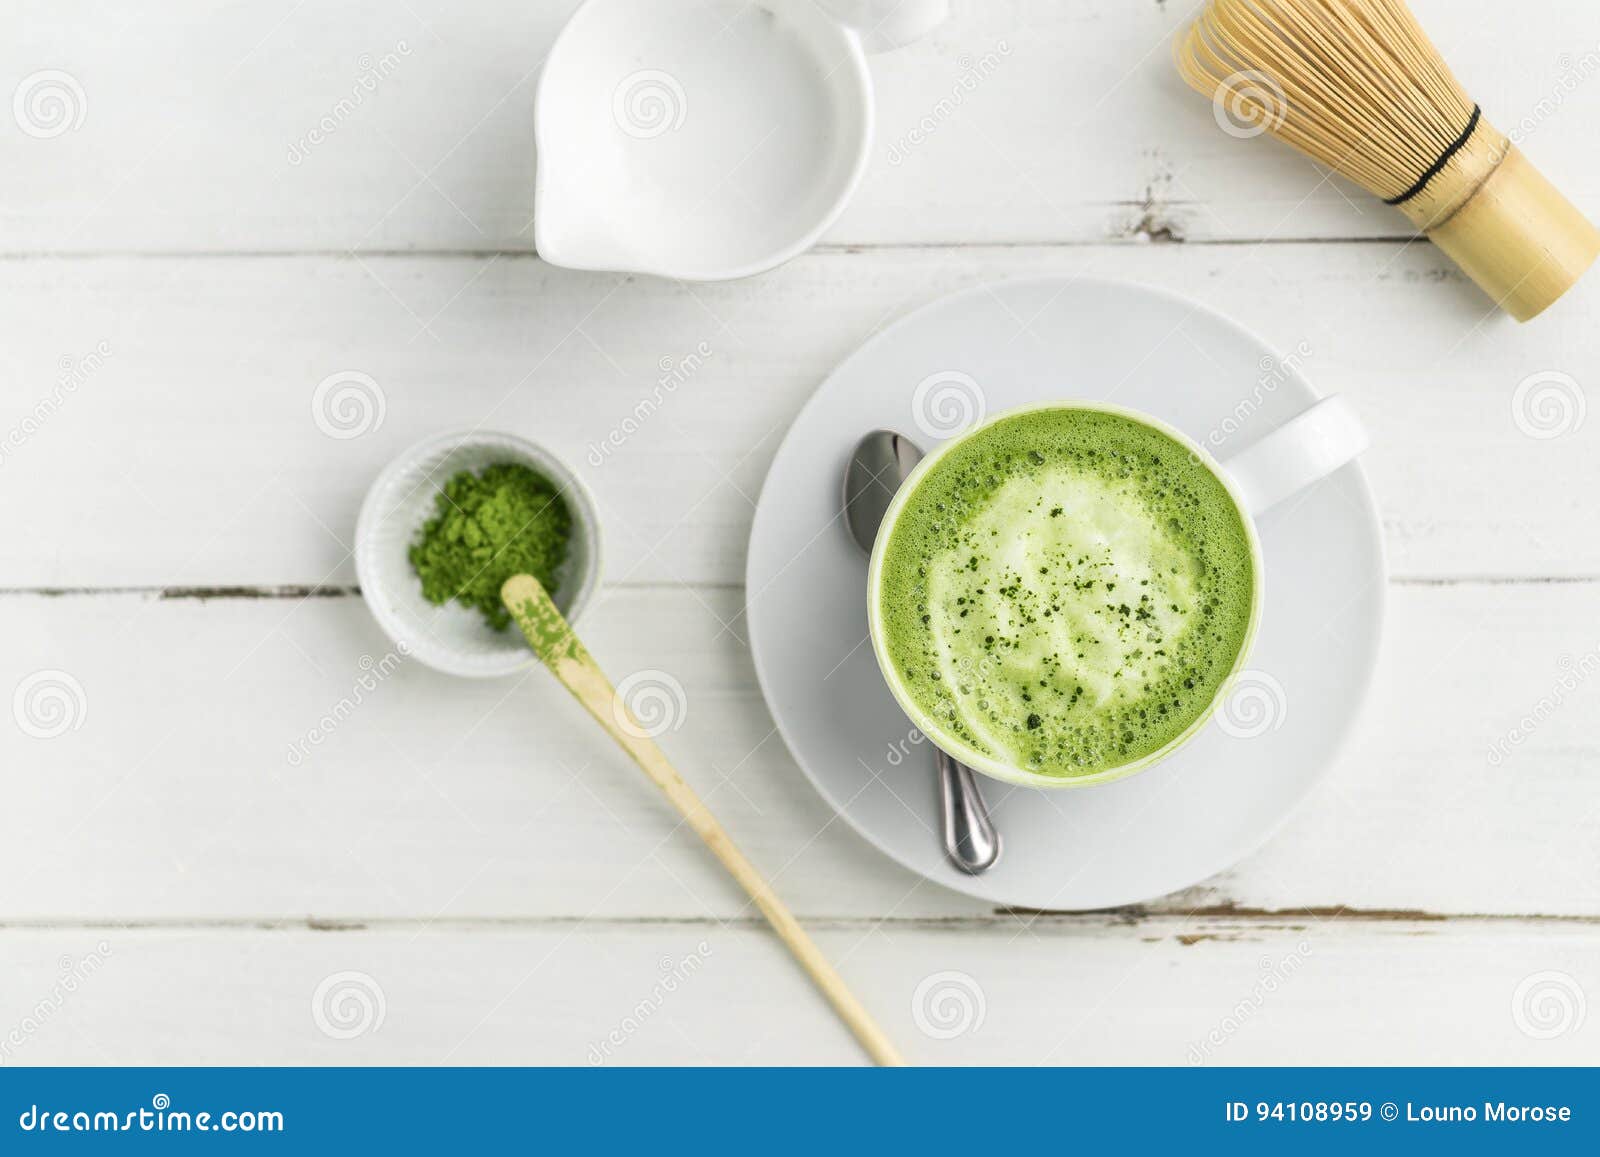 green tea matcha latte cup on white background from above flat v